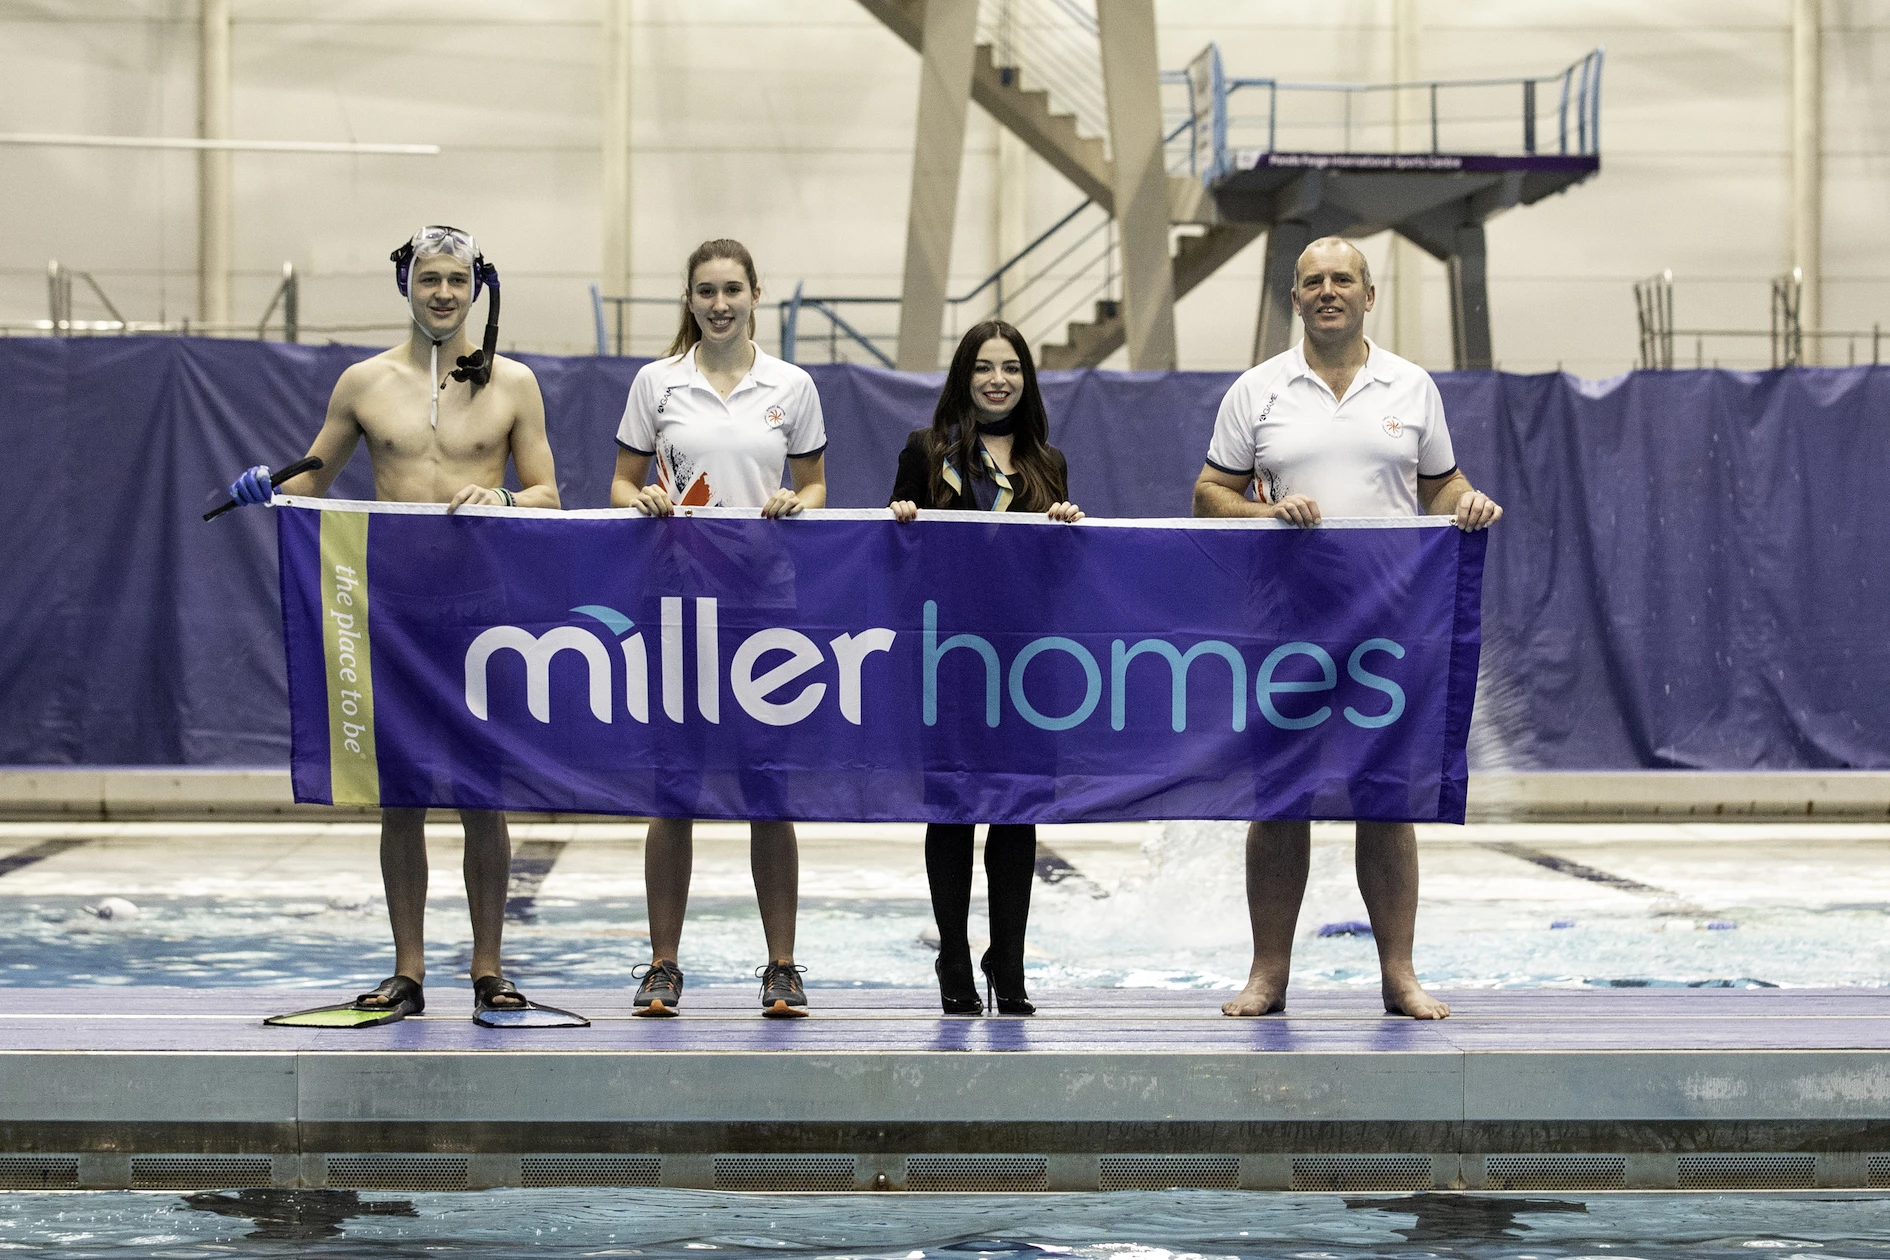 Glenn Schofield, GB Coach and Beth Mcdonagh from Miller Homes are joined by two of the current Octopush GB team players.